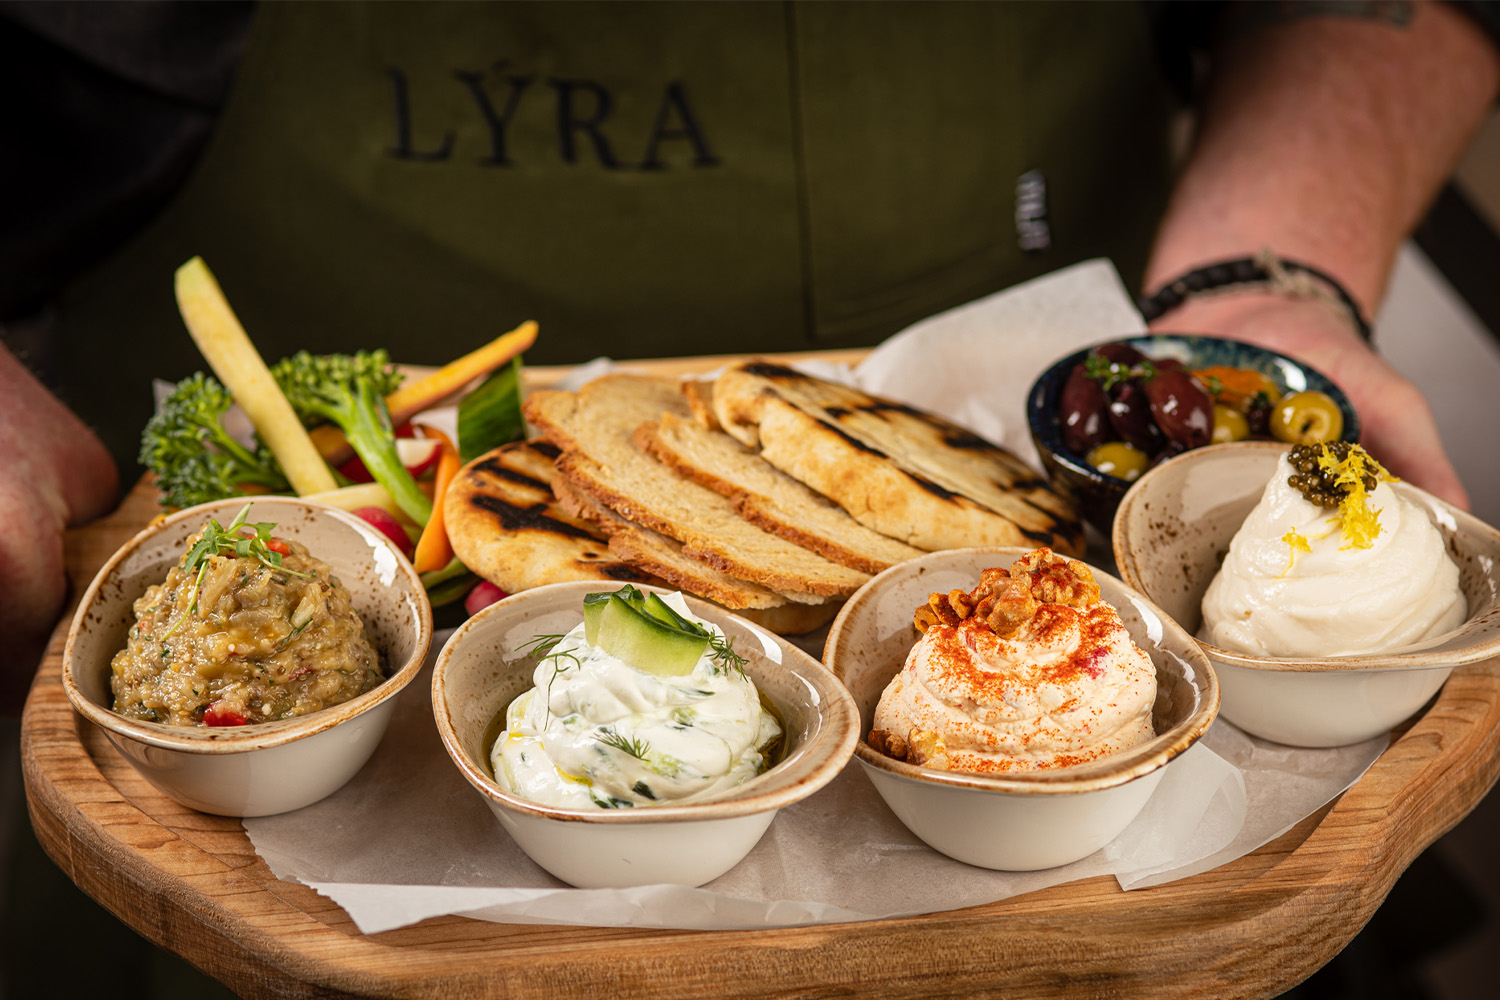 A platter of spreads from Lyra. 